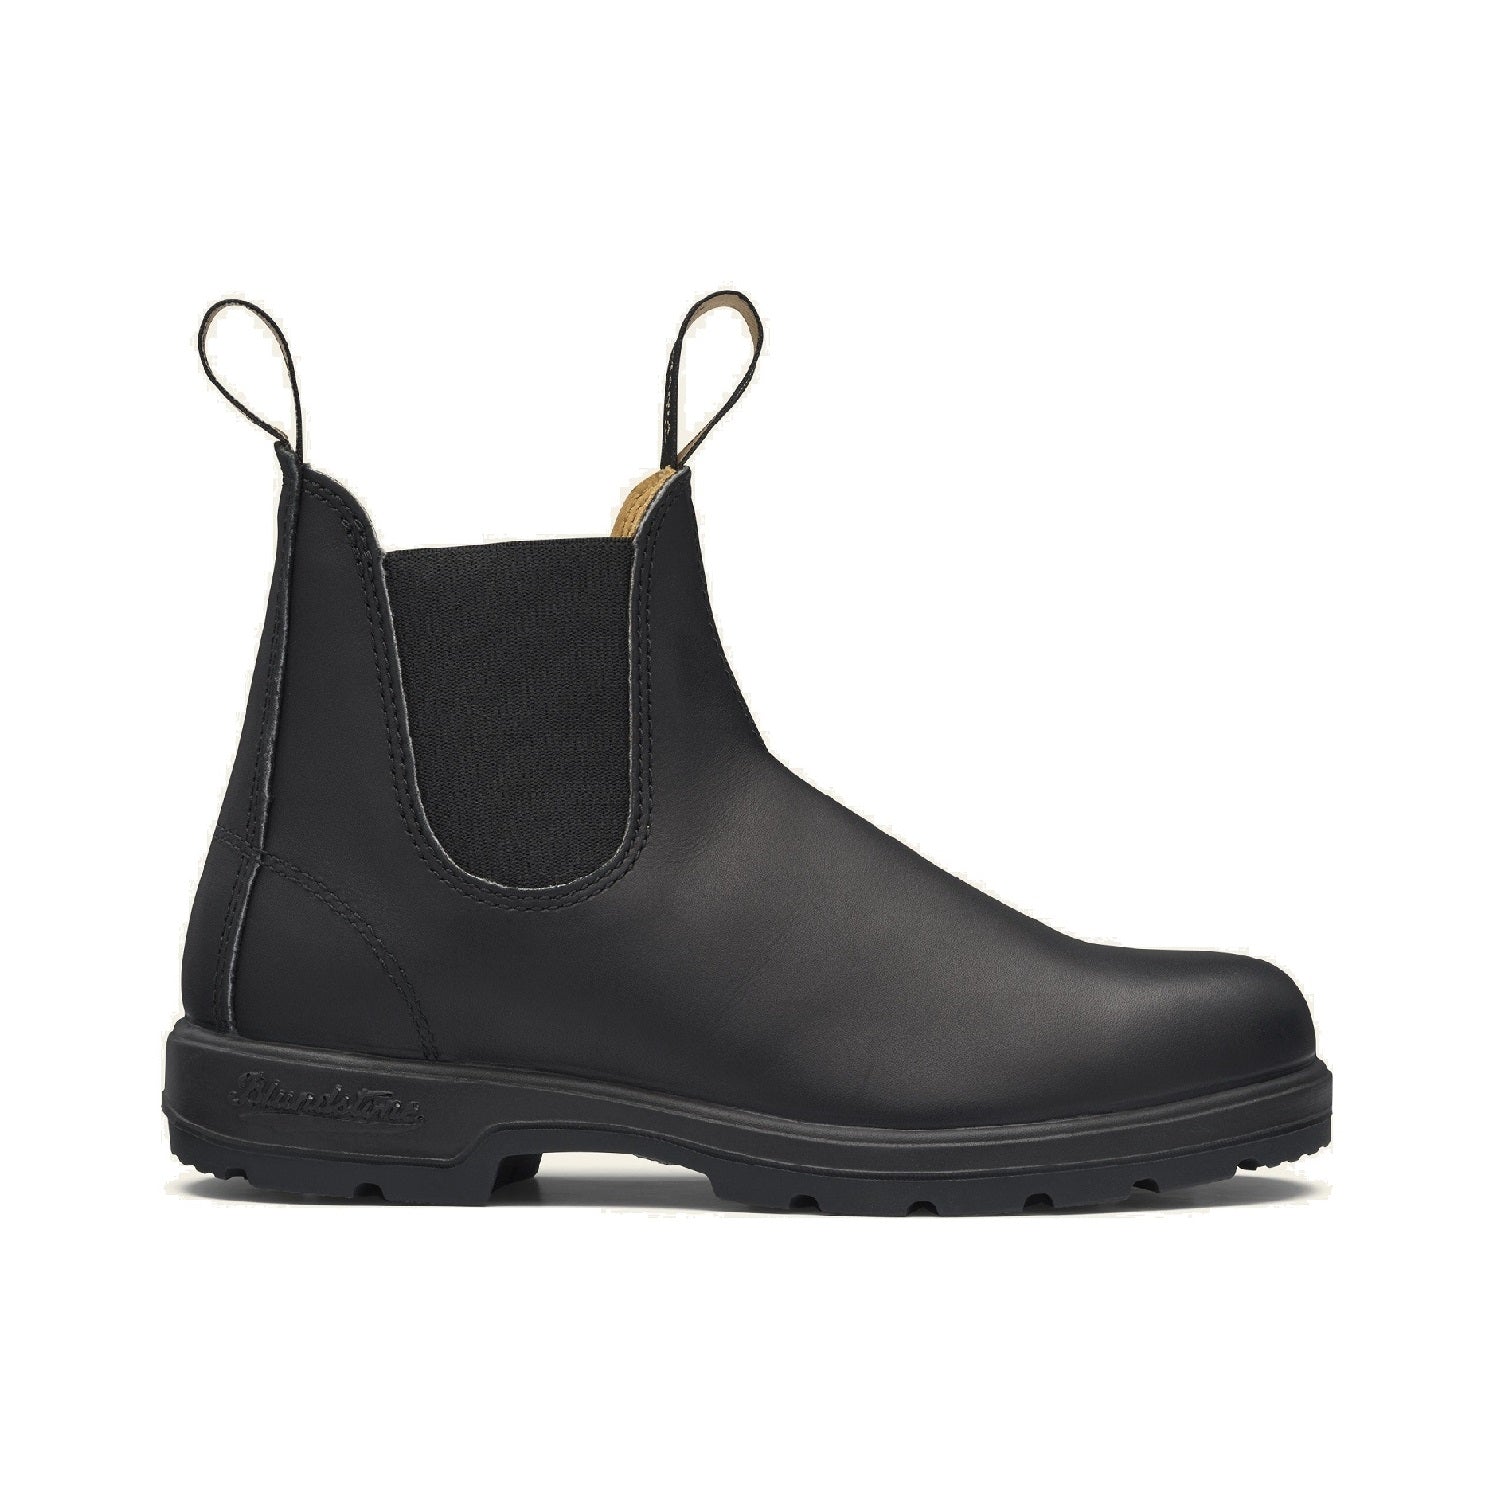 Black leather chelsea boot.